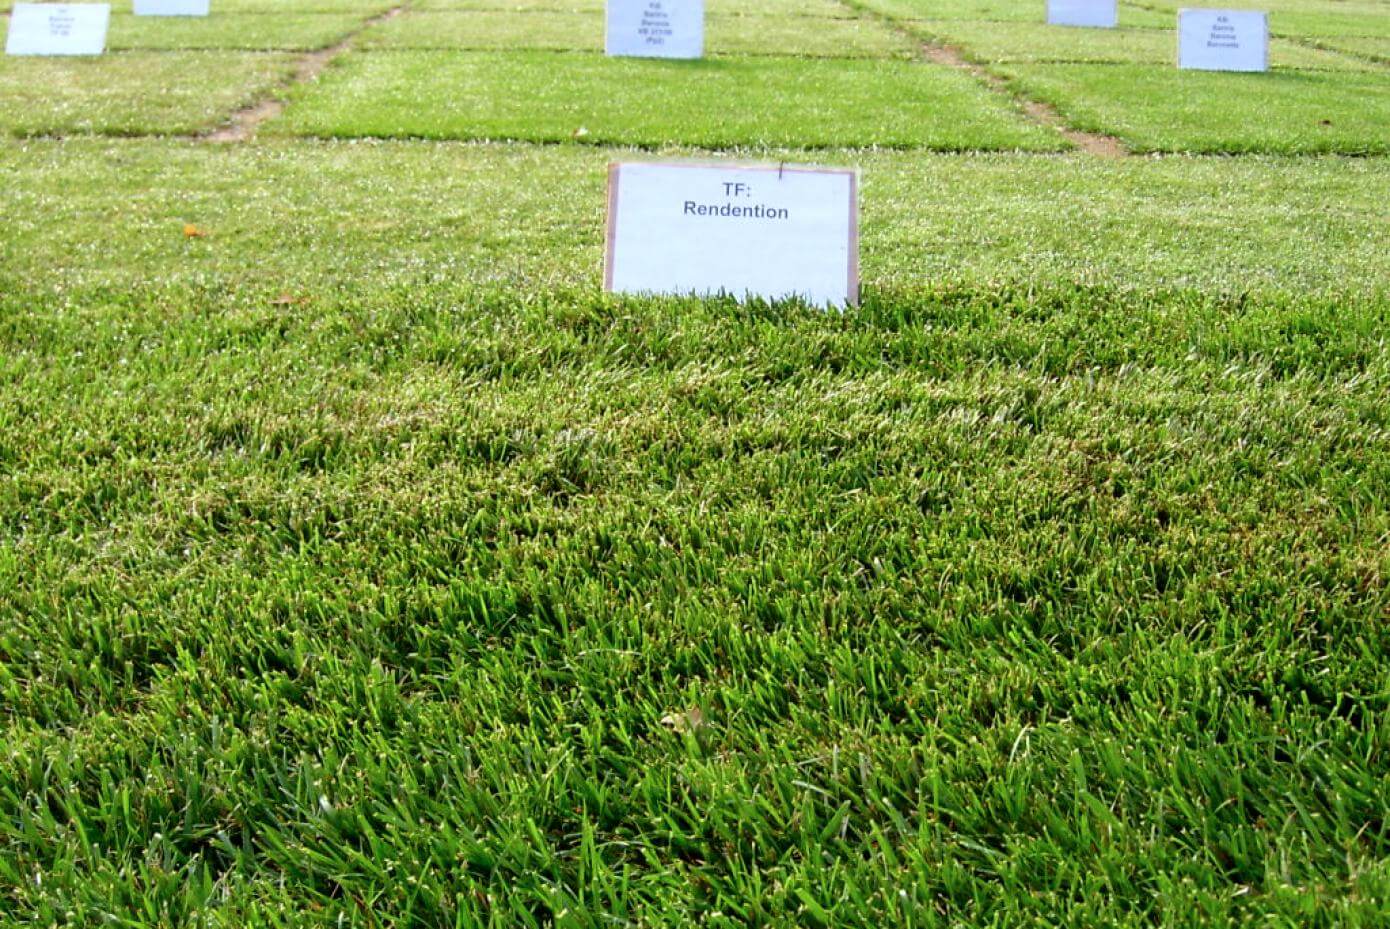 RenditionTall Fescue in a research trial